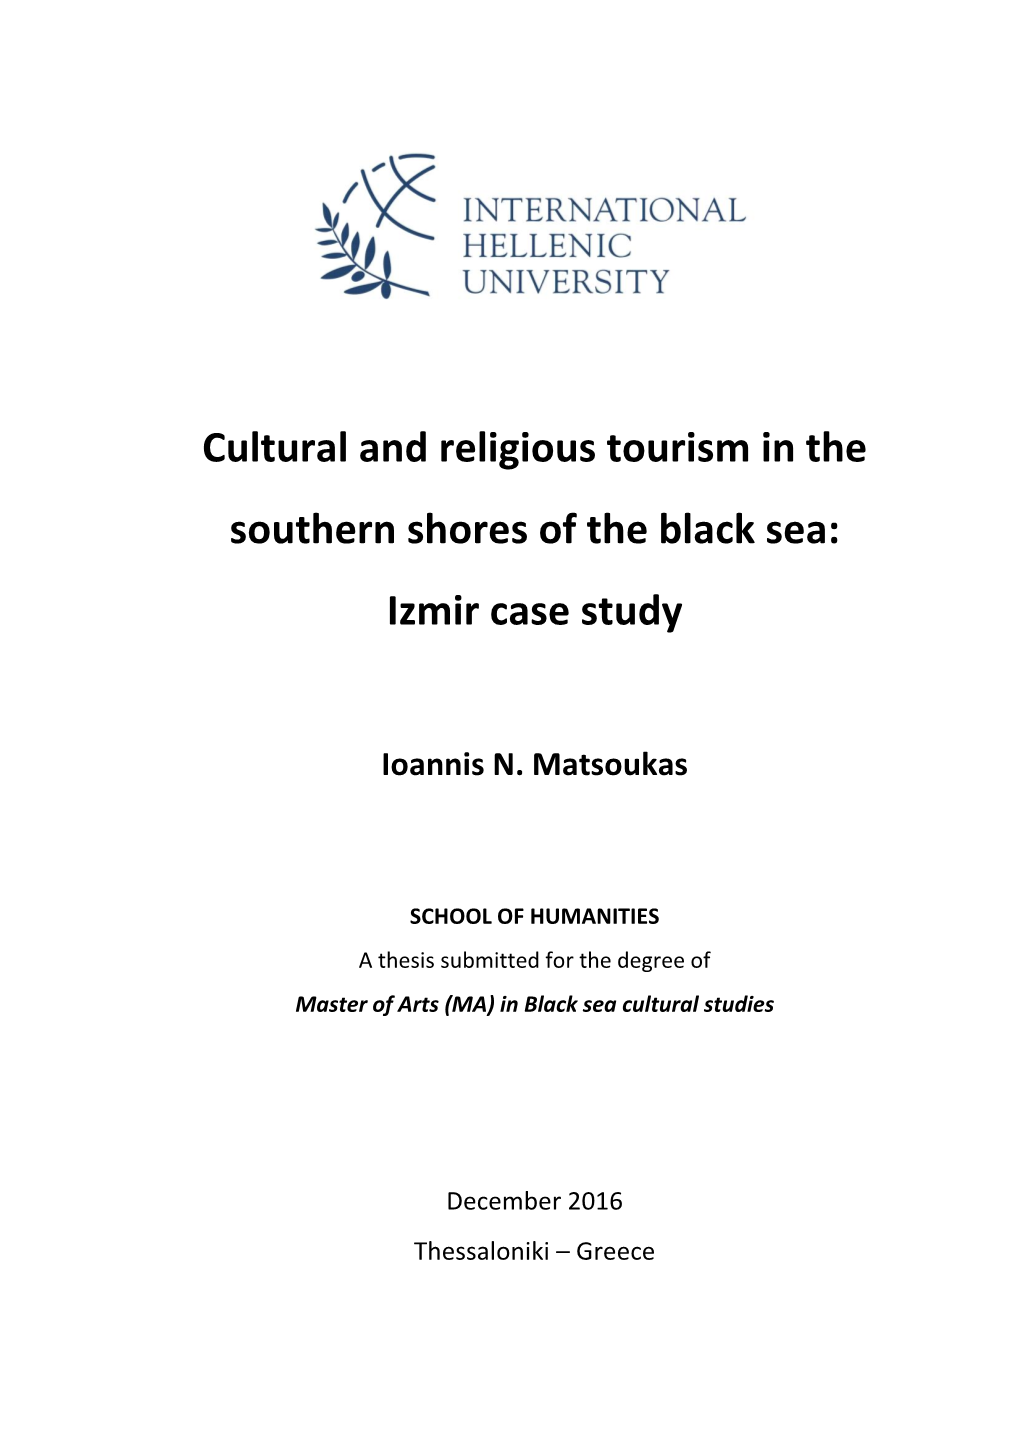 Cultural and Religious Tourism in the Southern Shores of the Black Sea: Izmir Case Study